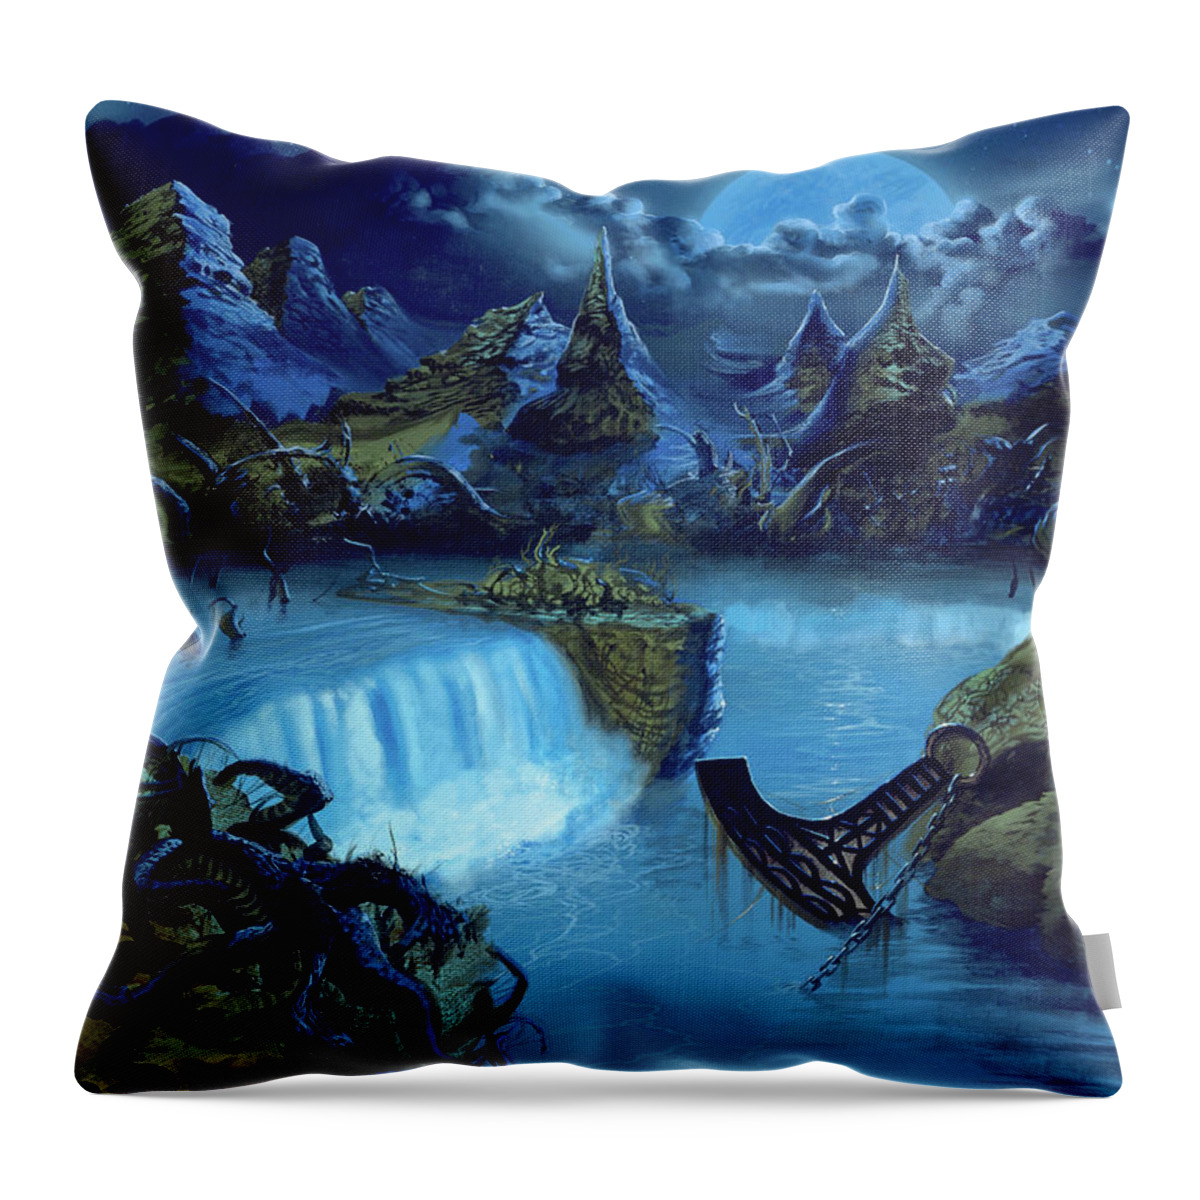 Amorphis Throw Pillow featuring the painting Tales from the Thousand Lakes by Sv Bell